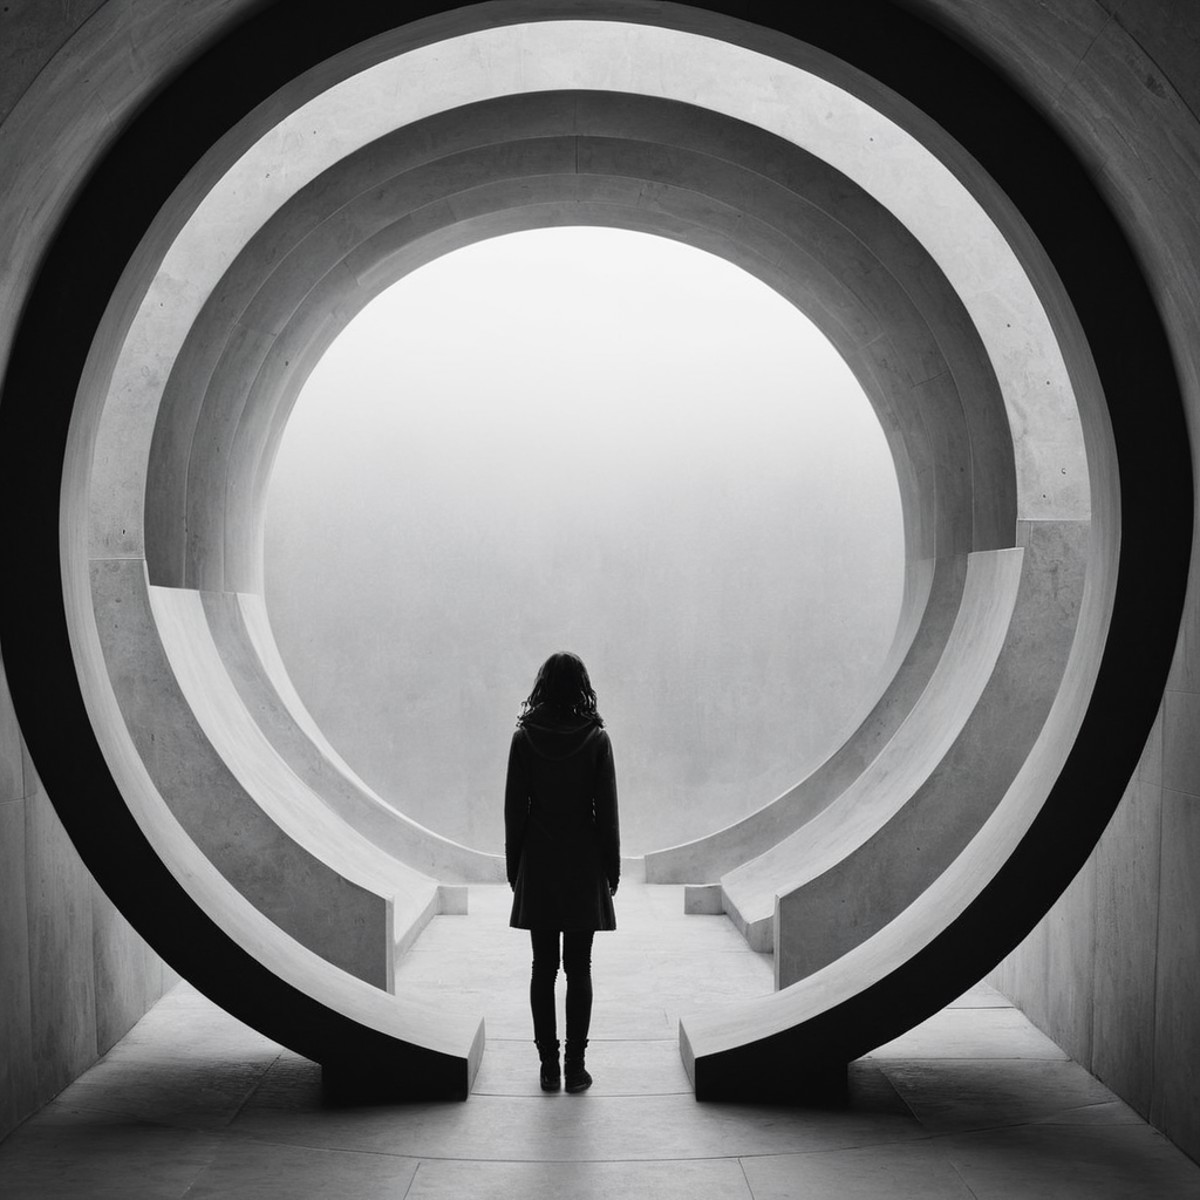 cinematic film still of  <lora:Fine art photography style:1>
Juxtaposition of a person standing in a circular architecture...